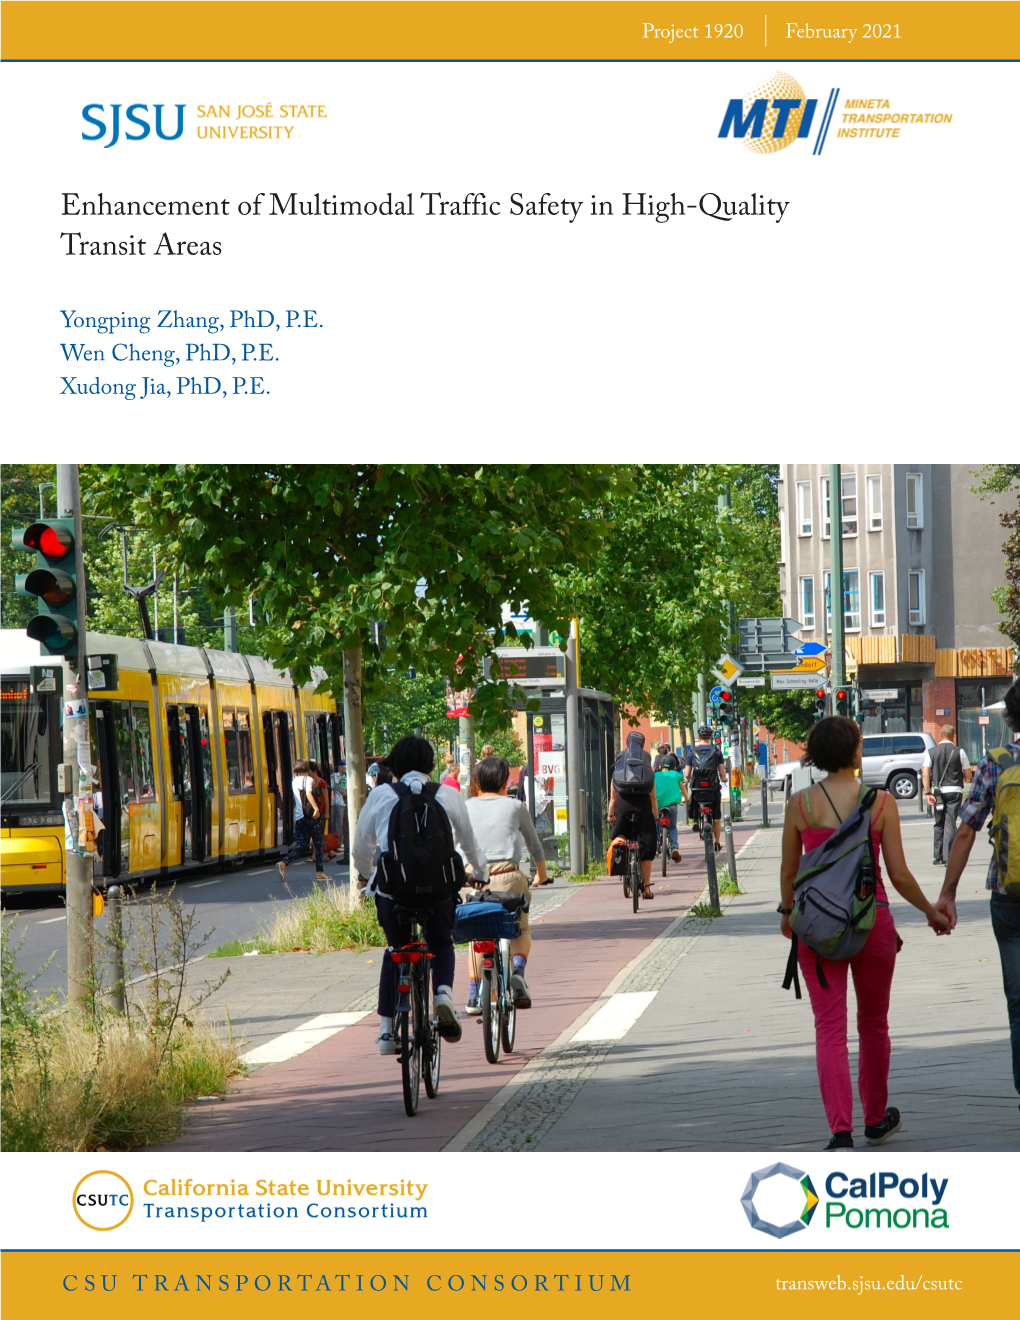 Enhancement of Multimodal Traffic Safety in High-Quality Transit Areas